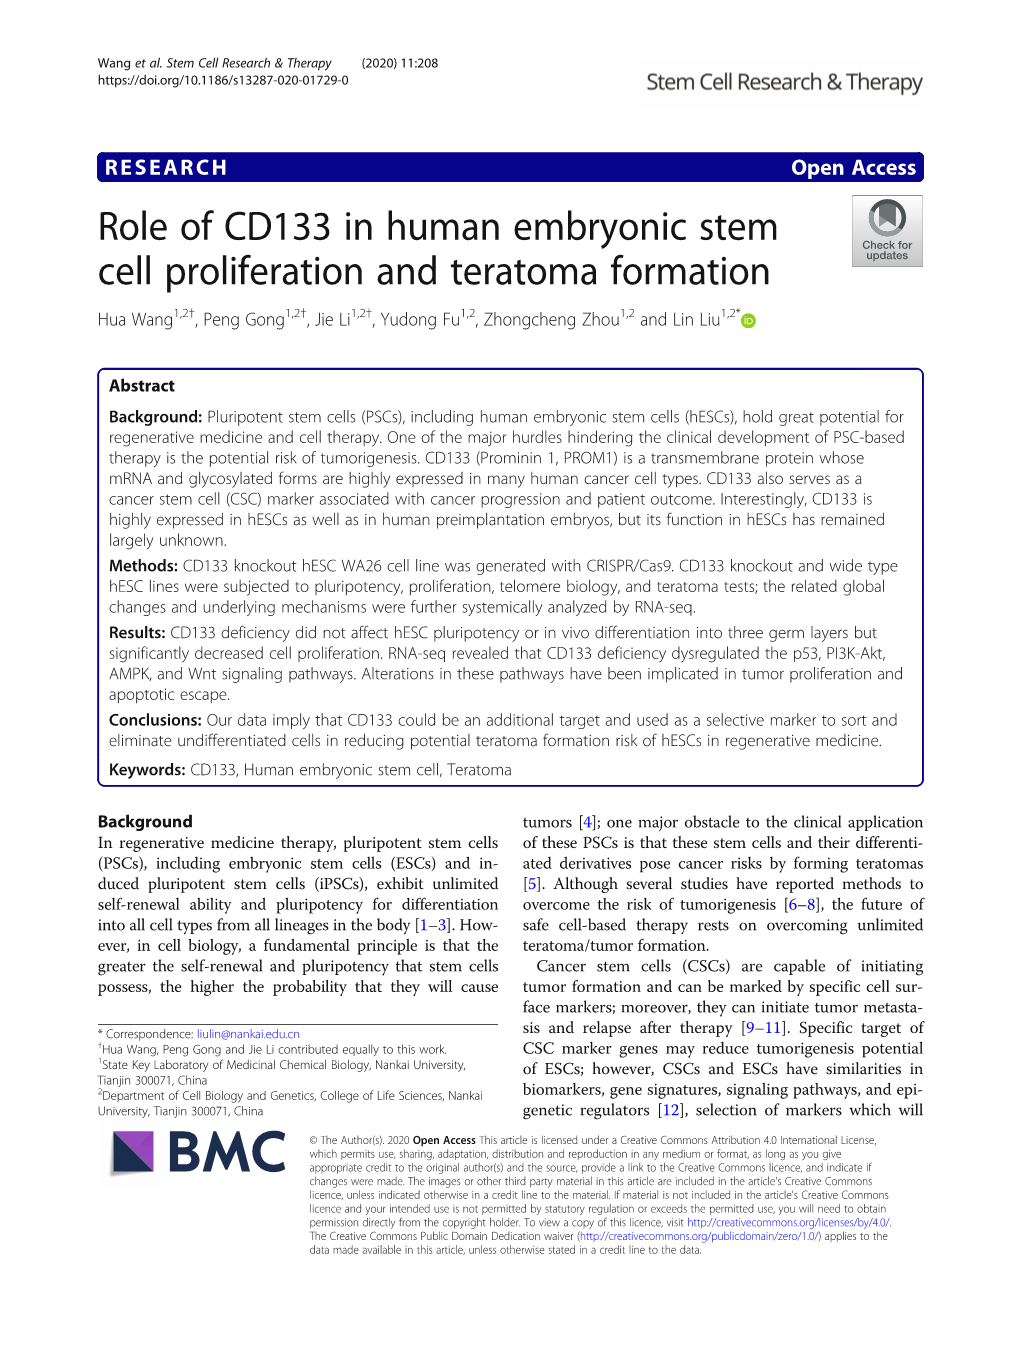 Role of CD133 in Human Embryonic Stem Cell Proliferation and Teratoma